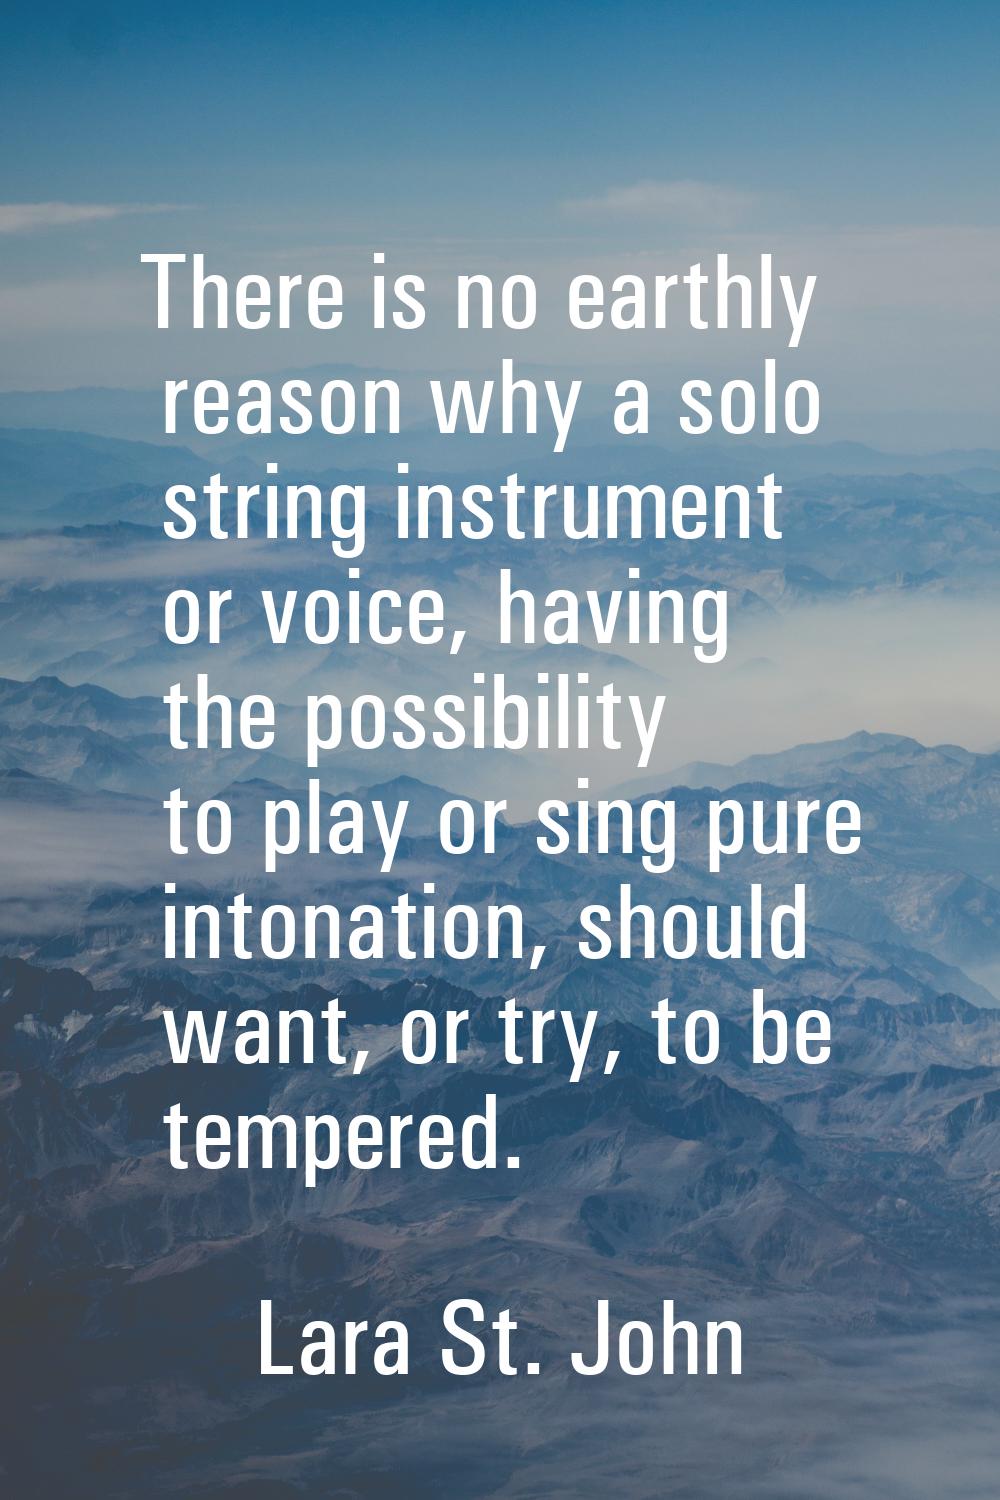 There is no earthly reason why a solo string instrument or voice, having the possibility to play or